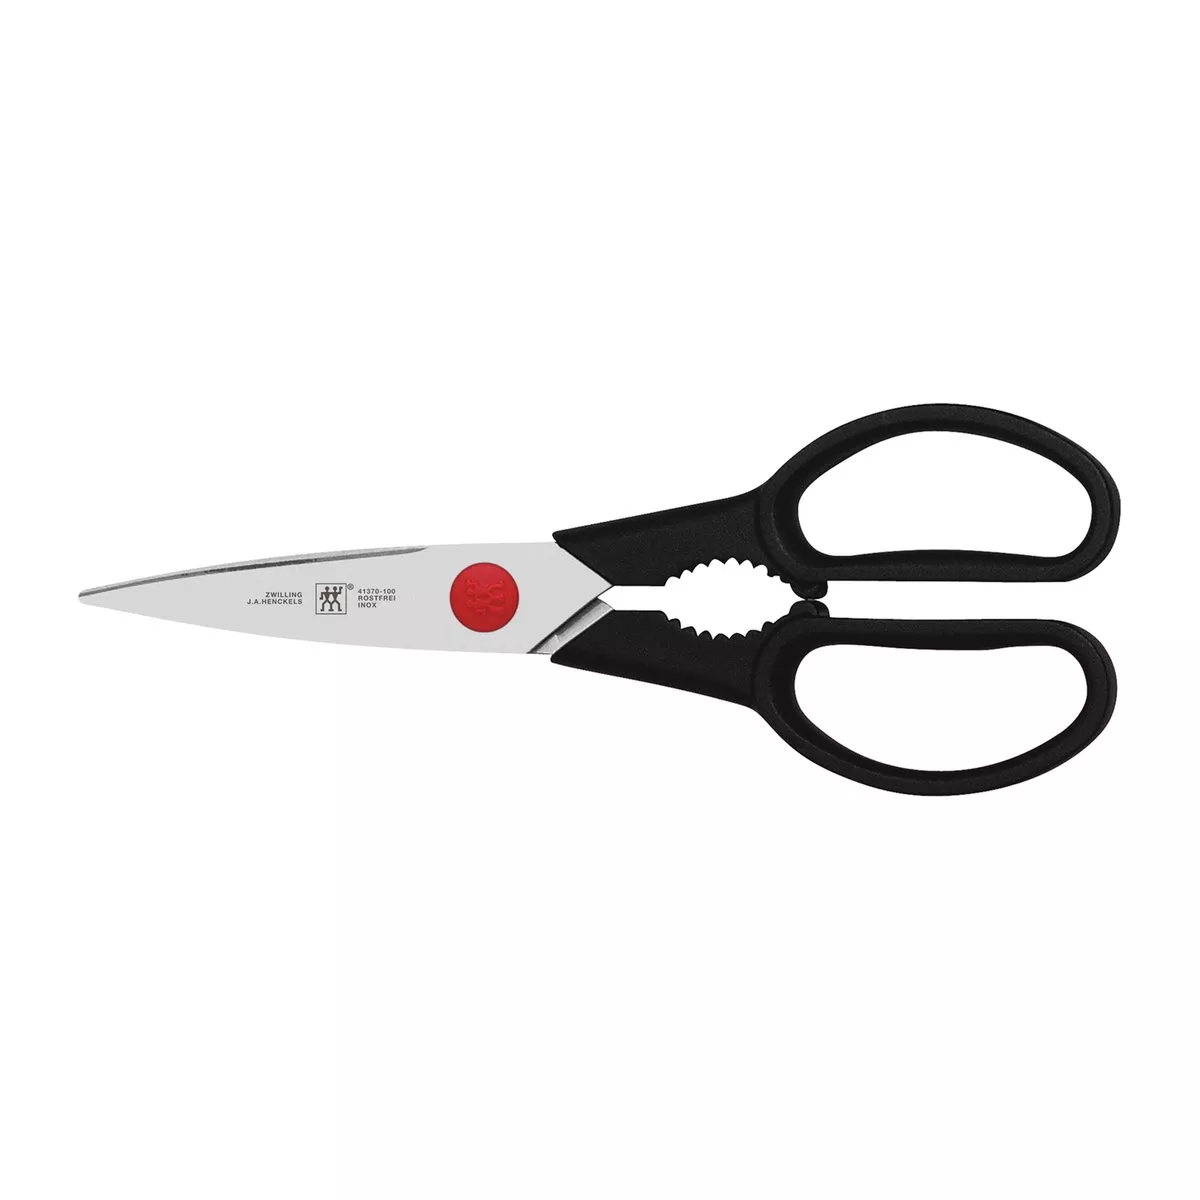 #3 - Zwilling Zwilling Twin L universalsaks 20 cm